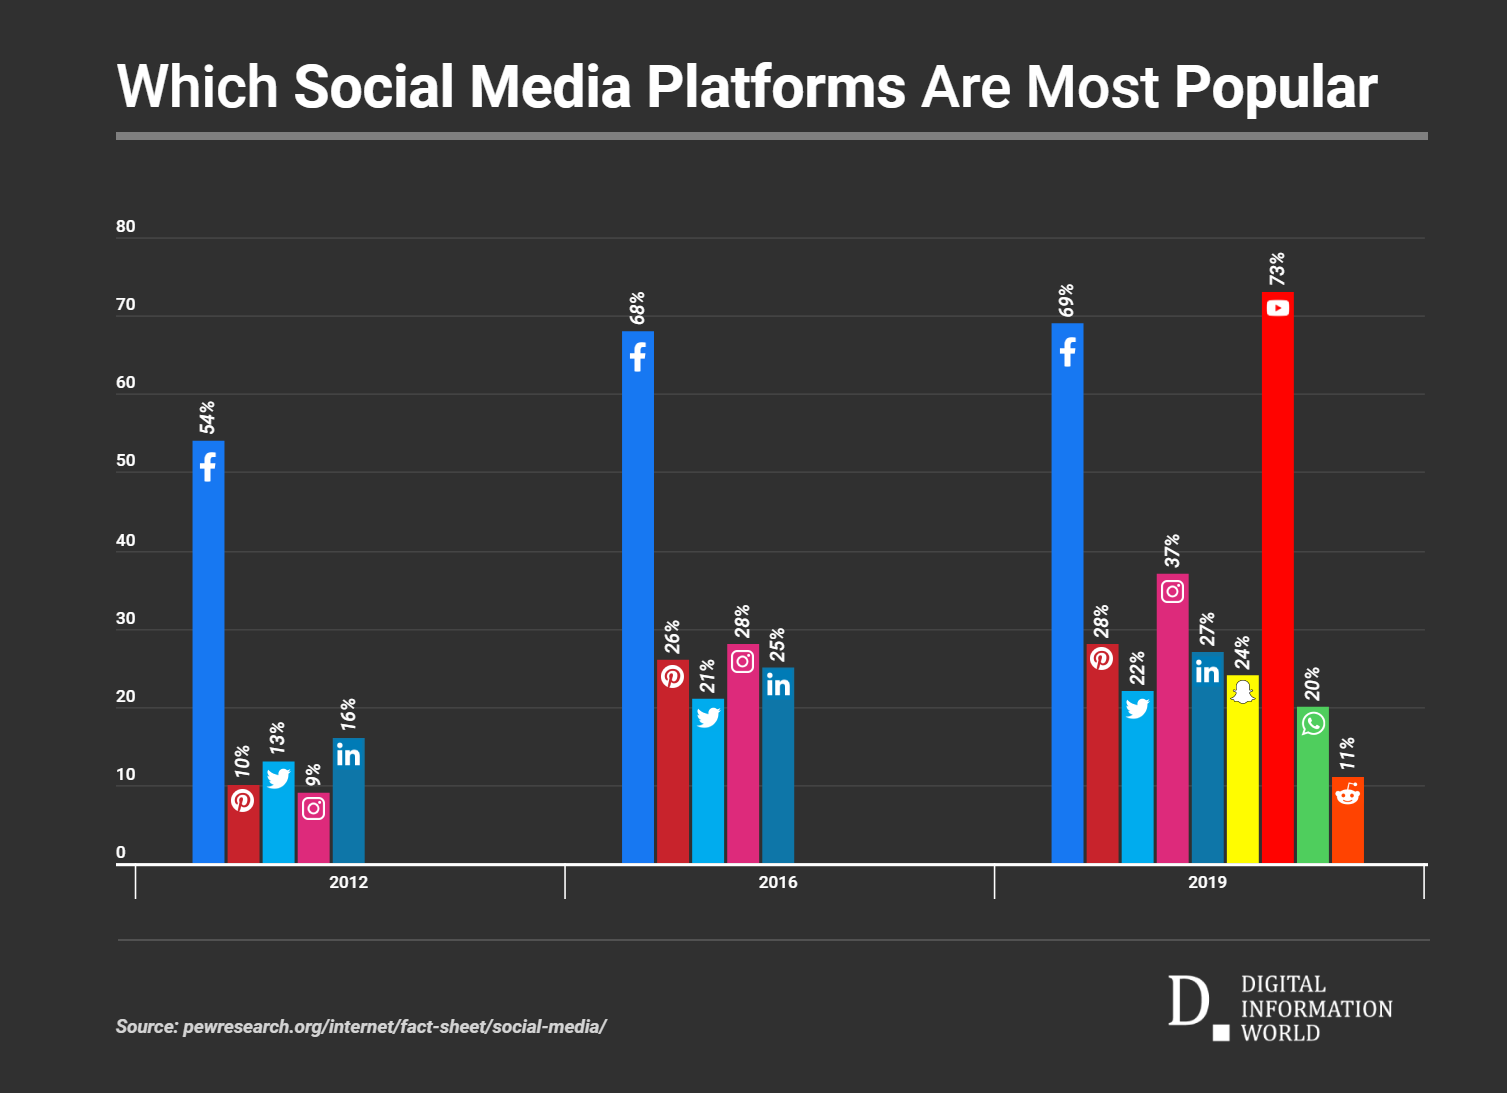 Despite The Criticism and Competition, Users Love Spending Time on YouTube and Facebook The Most [Chart]